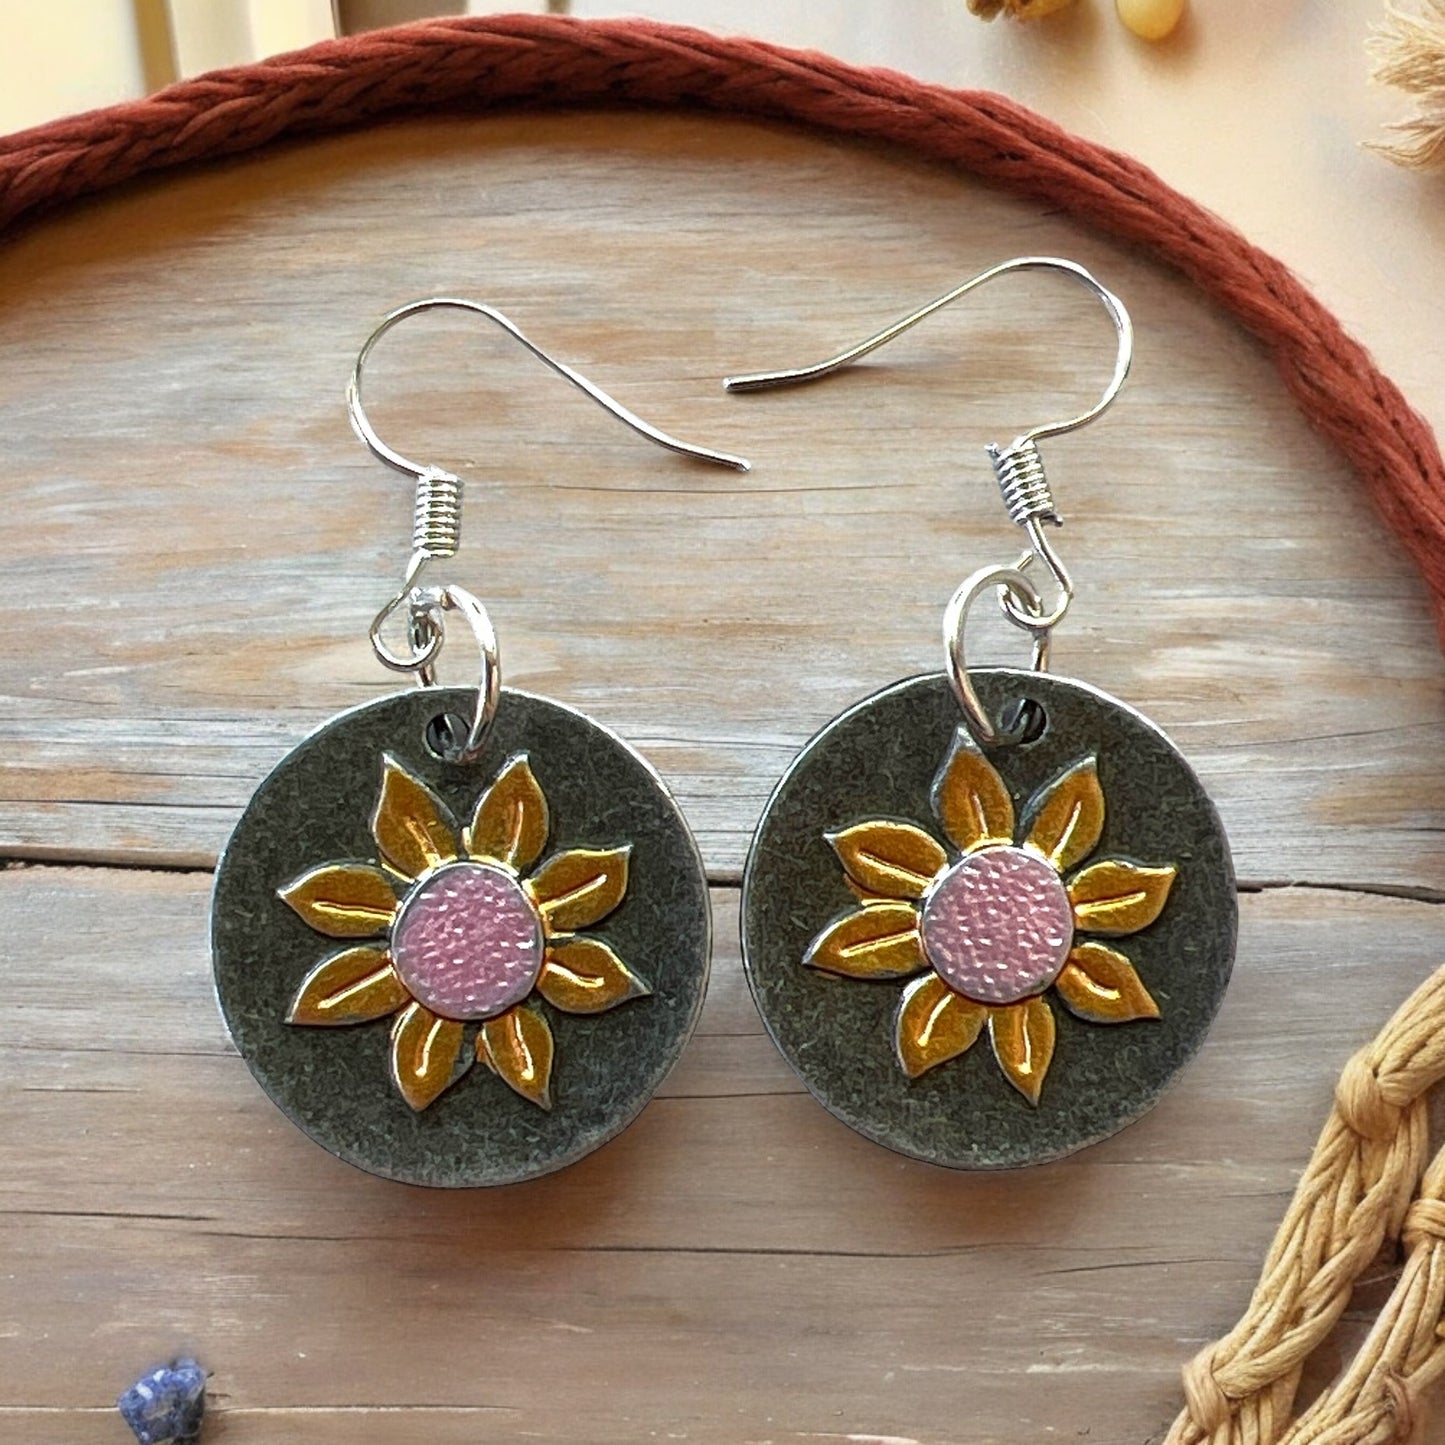 Round Silver Earrings with Sunflowers: Nature-Inspired Accessories